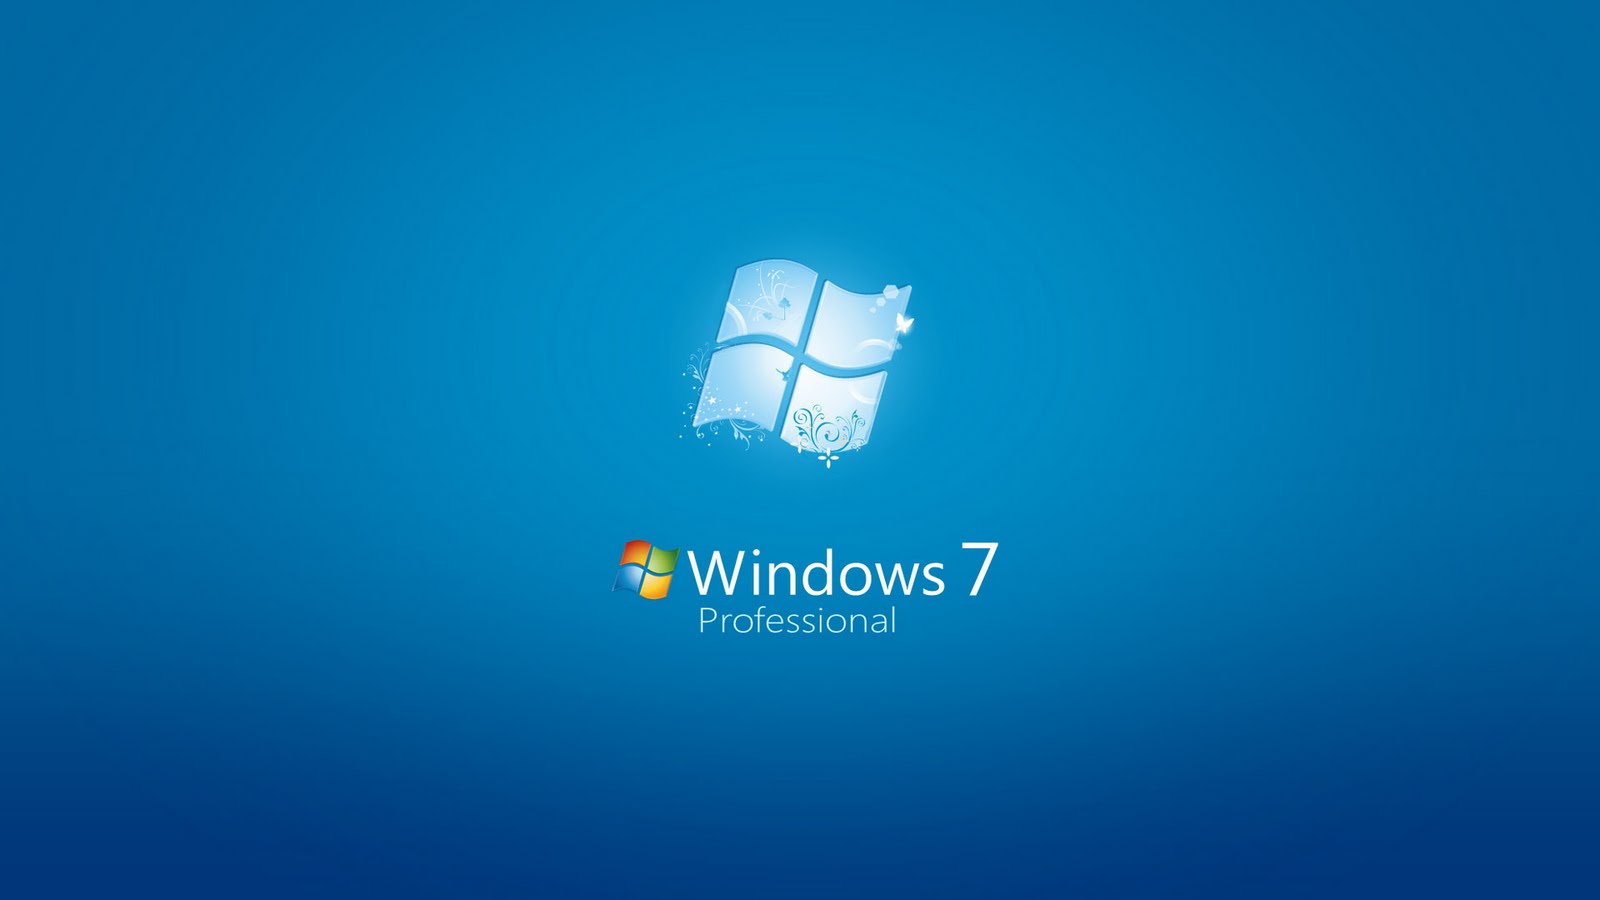 Windows 7 extended support runs until January 14, 2020.Image Credit: Vega Computer